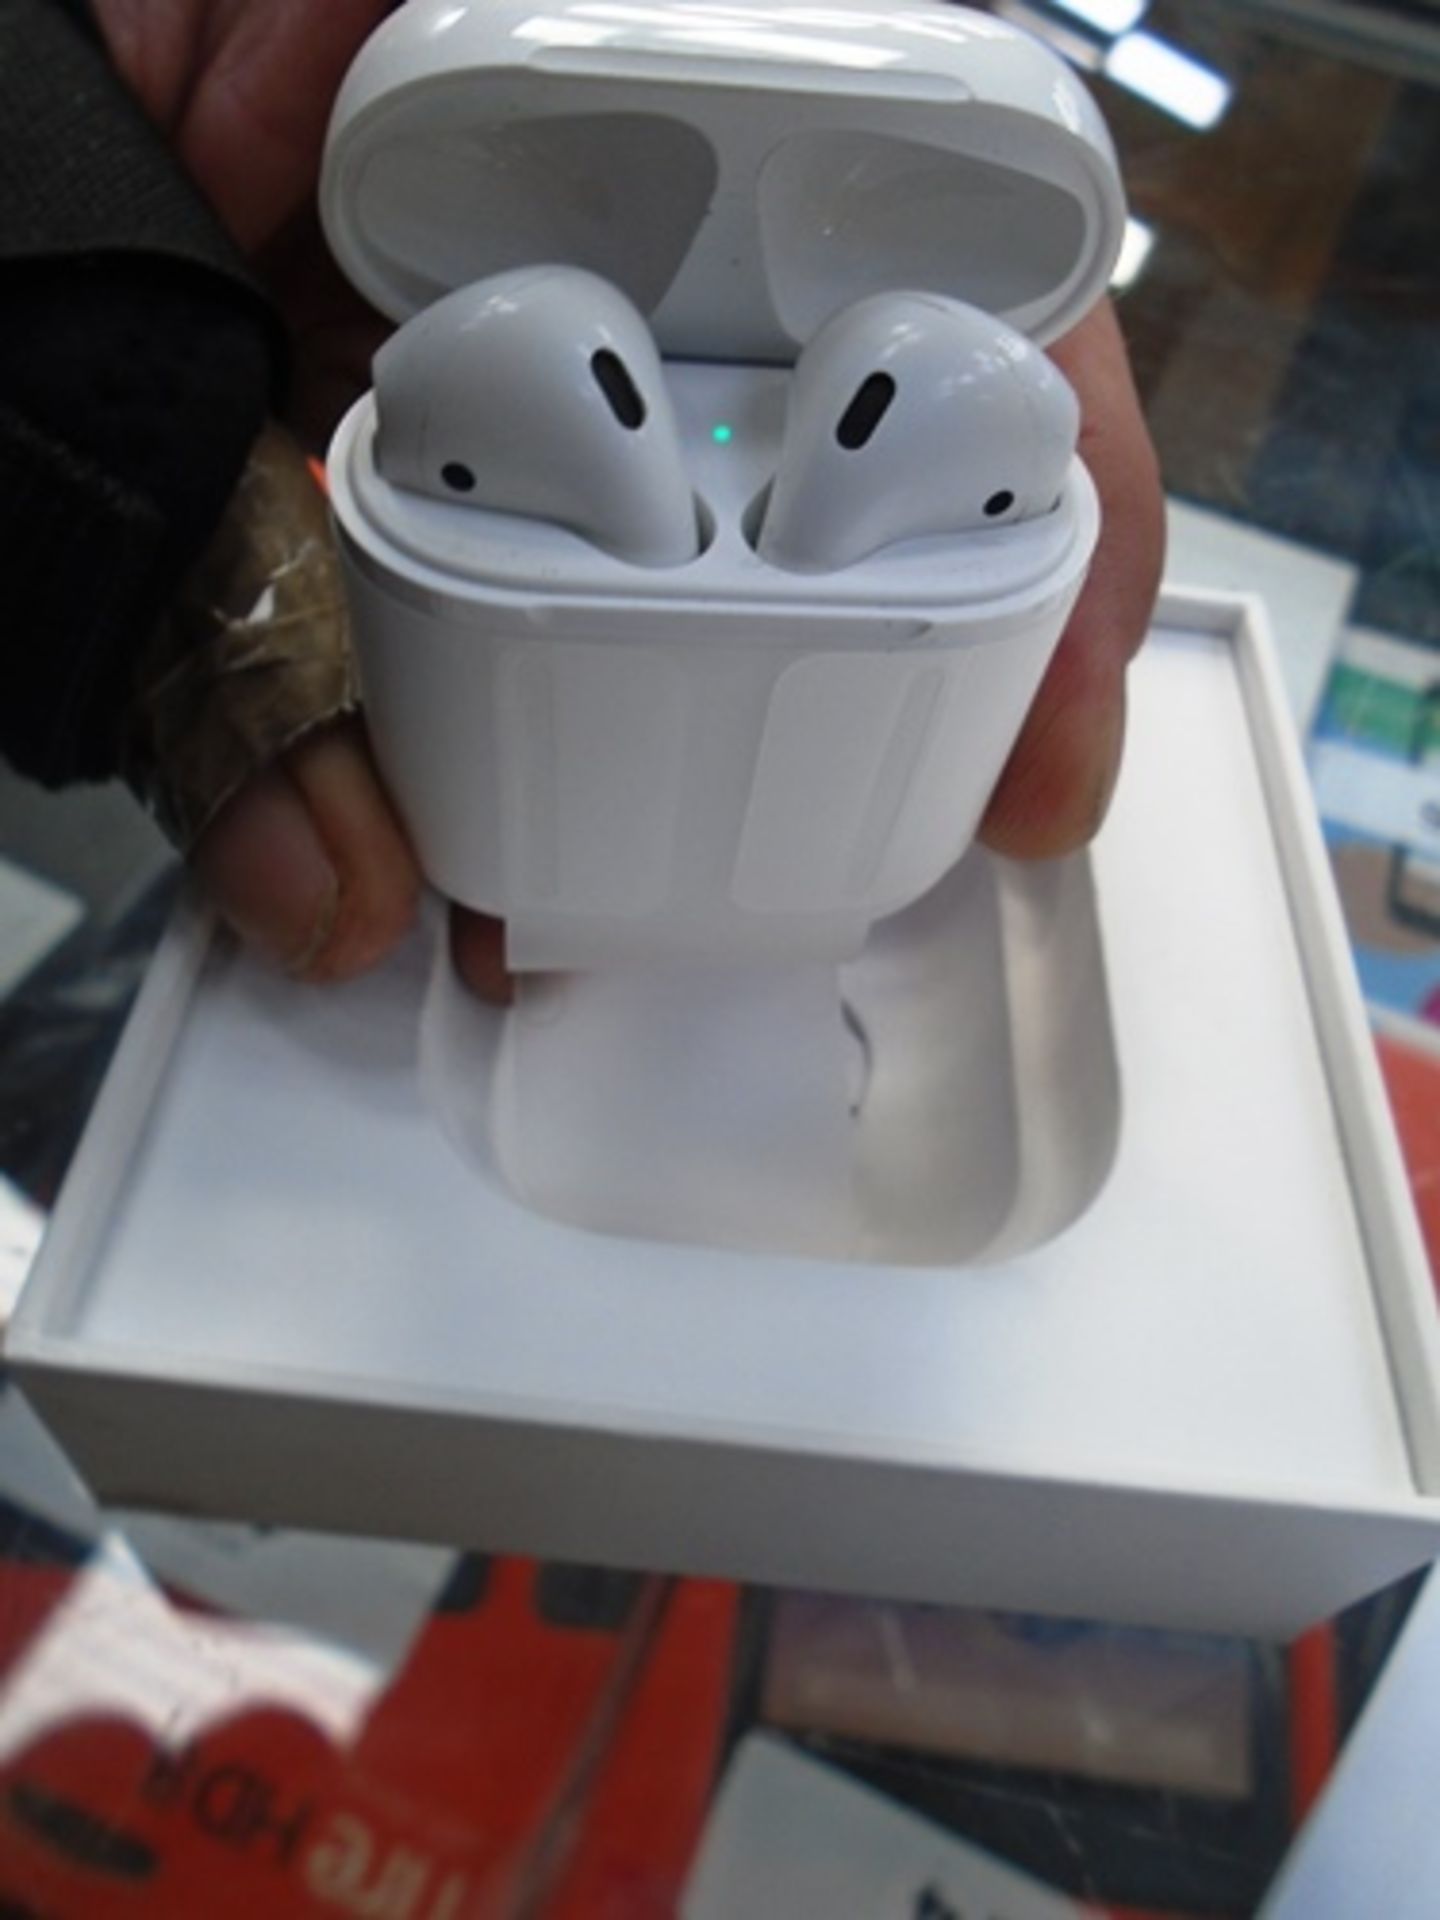 A pair of Apple Airpods headphones, model A1602 - New in box, box open (FC2) - Image 2 of 2